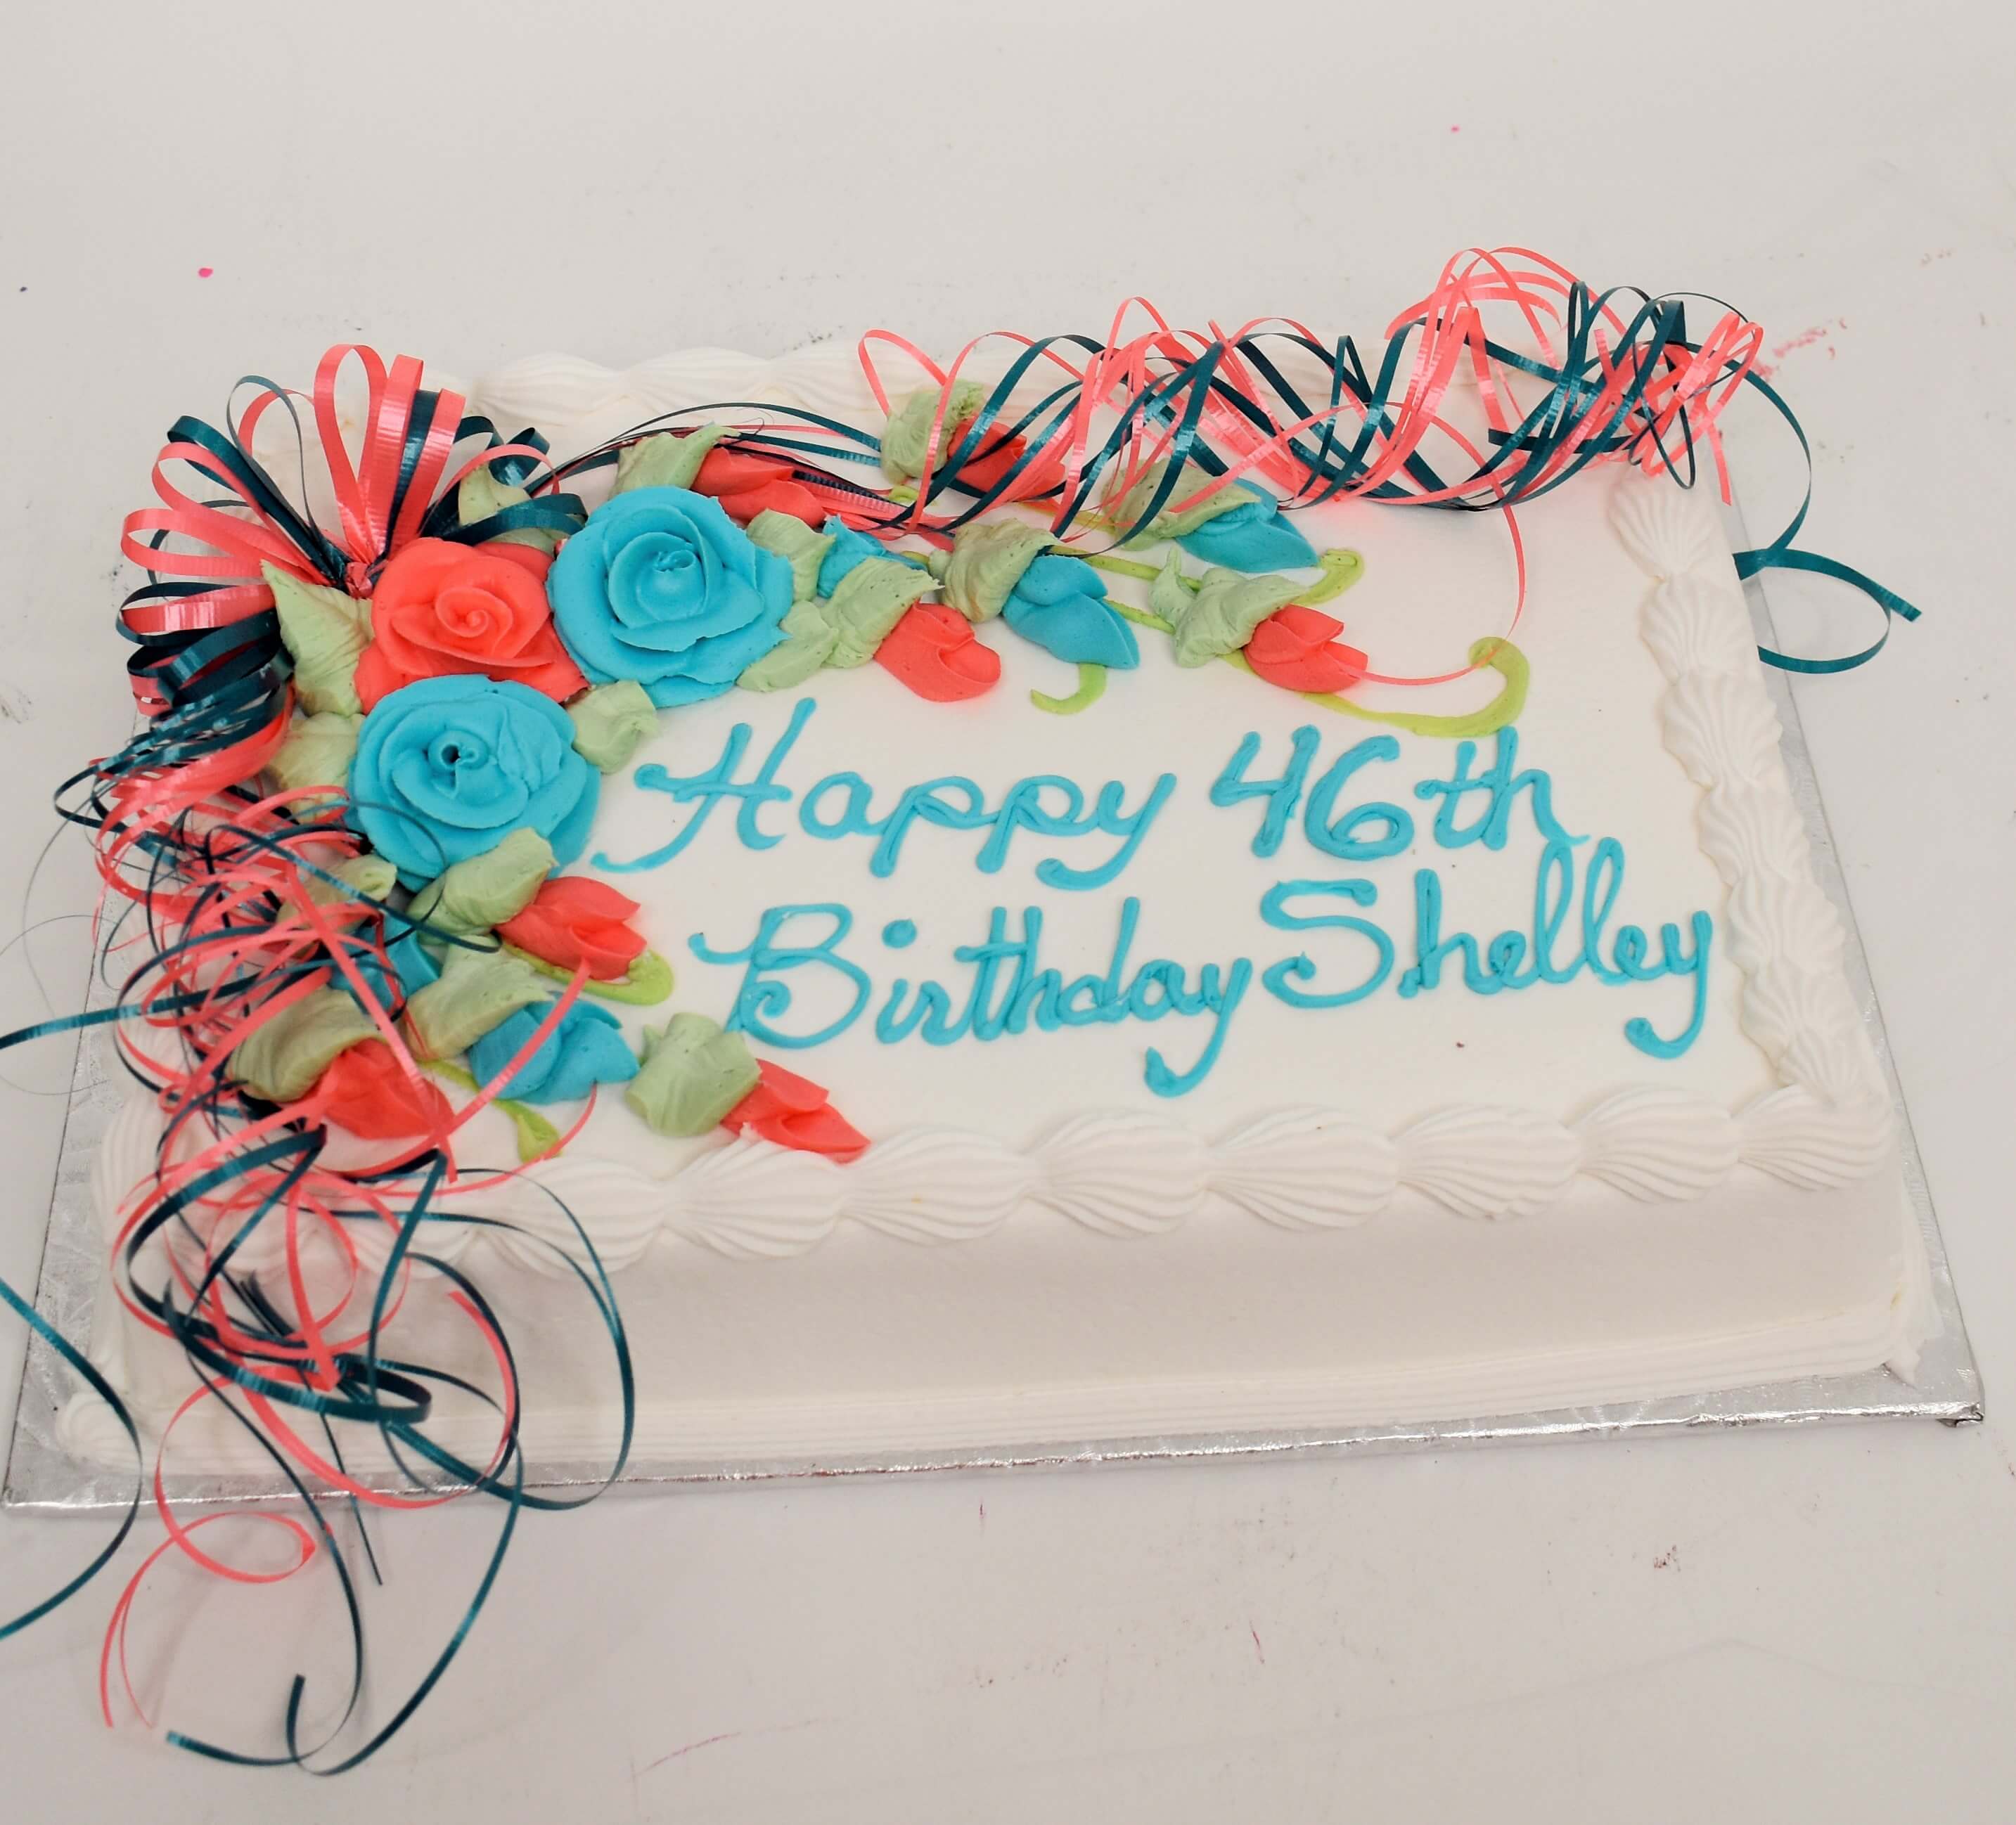 McArthur's Bakery Custom Cake With Bright Pink And Bright Blue Roses